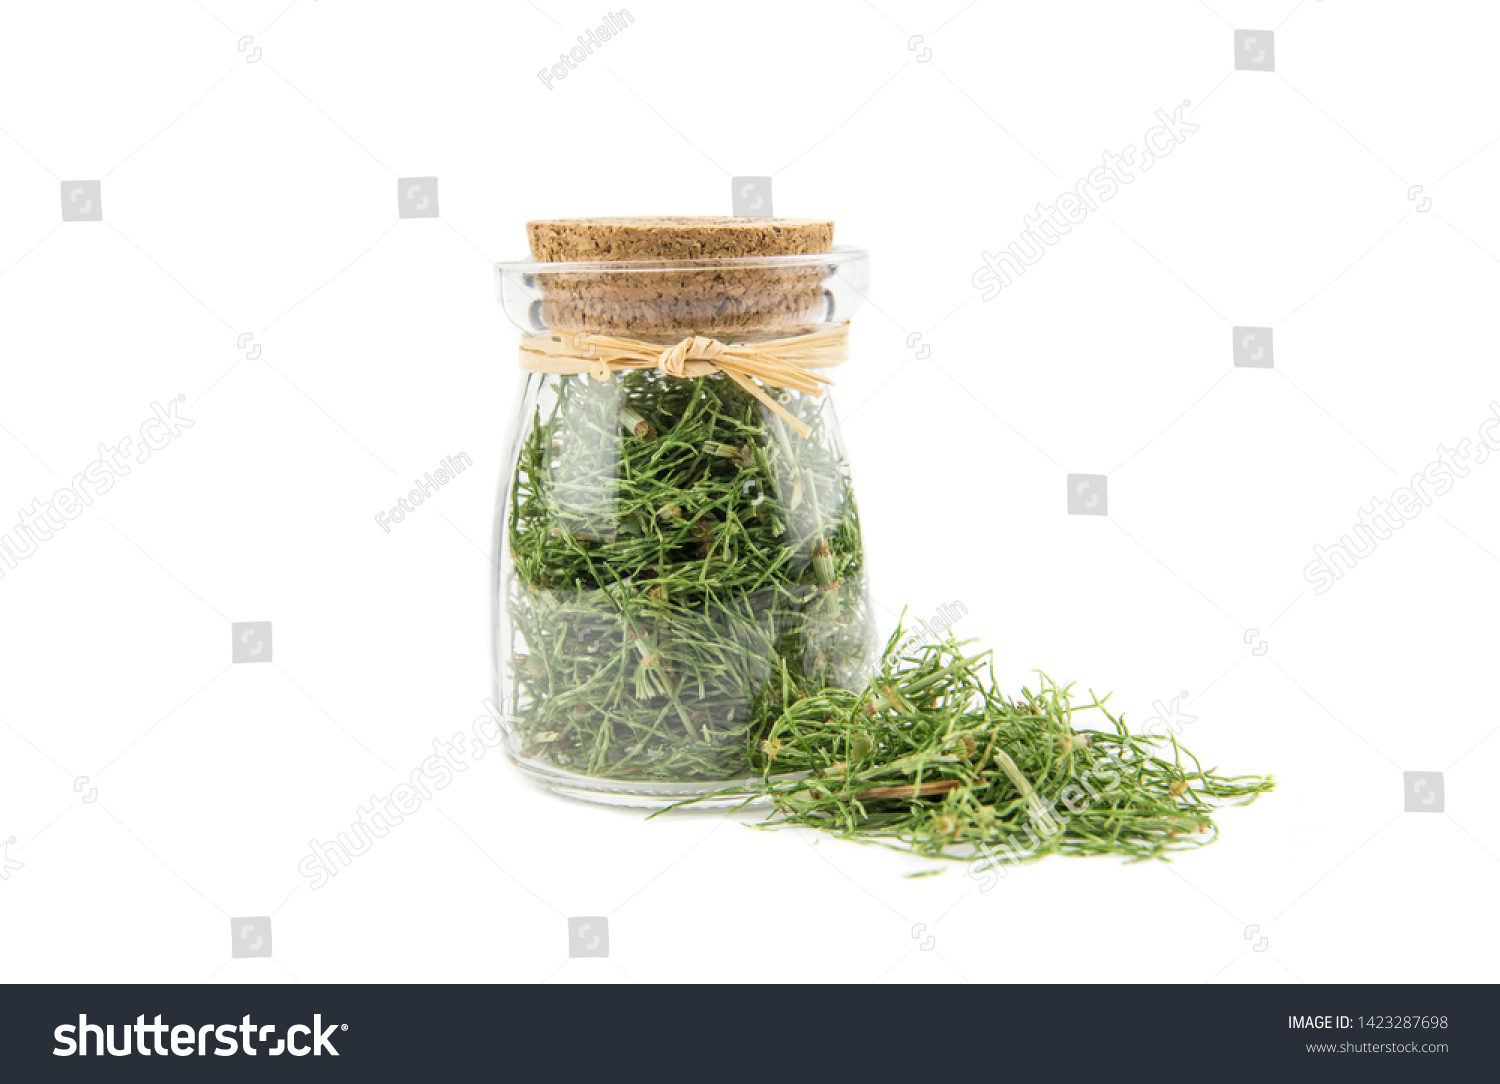 Pile of dried natural herbal medicine called Equisetum arvense the field horsetail or common horsetail isolated on white next to filled glass jar. #1423287698